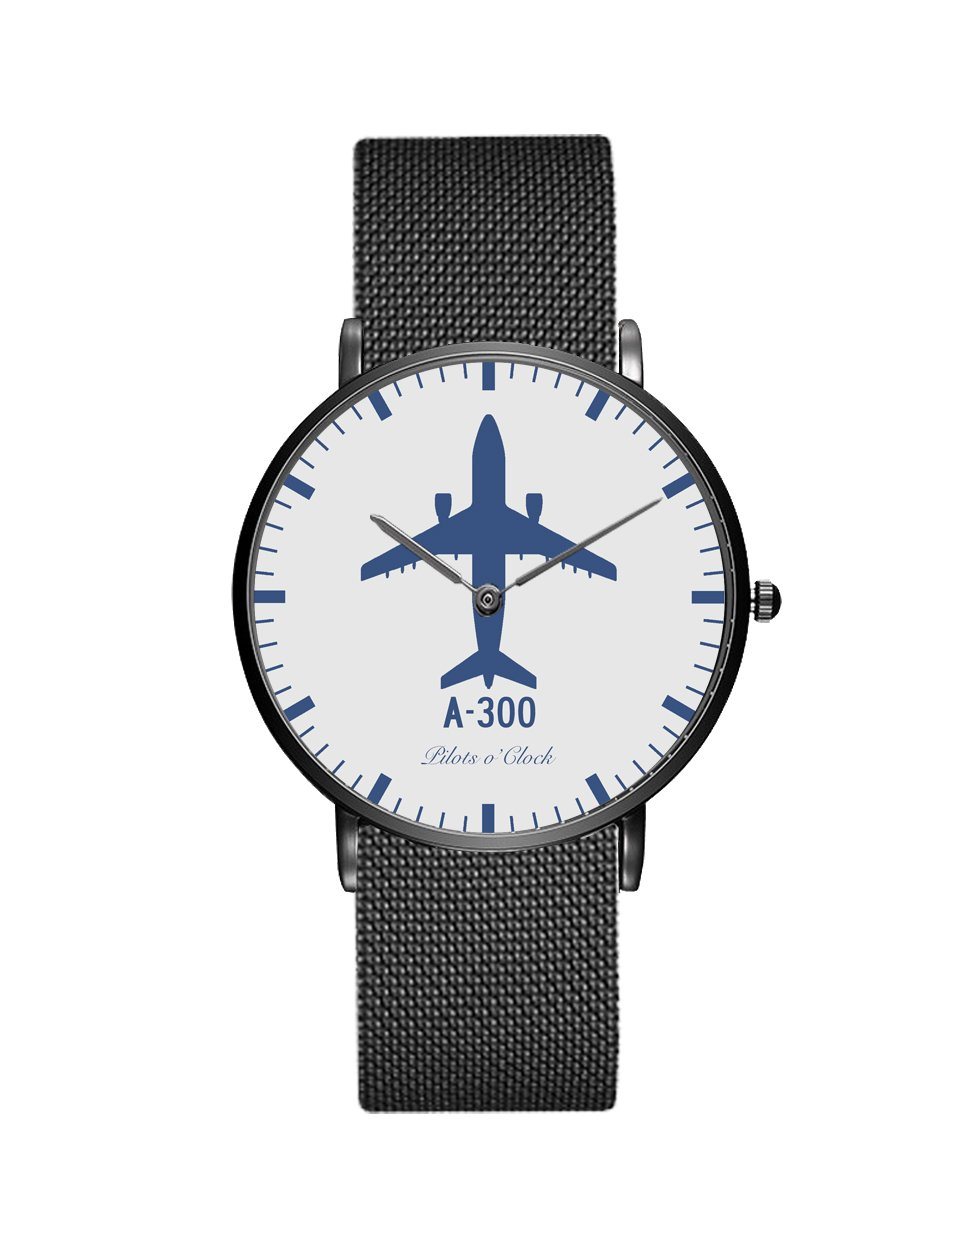 Airbus A300 Stainless Steel Strap Watches Pilot Eyes Store Black & Stainless Steel Strap 